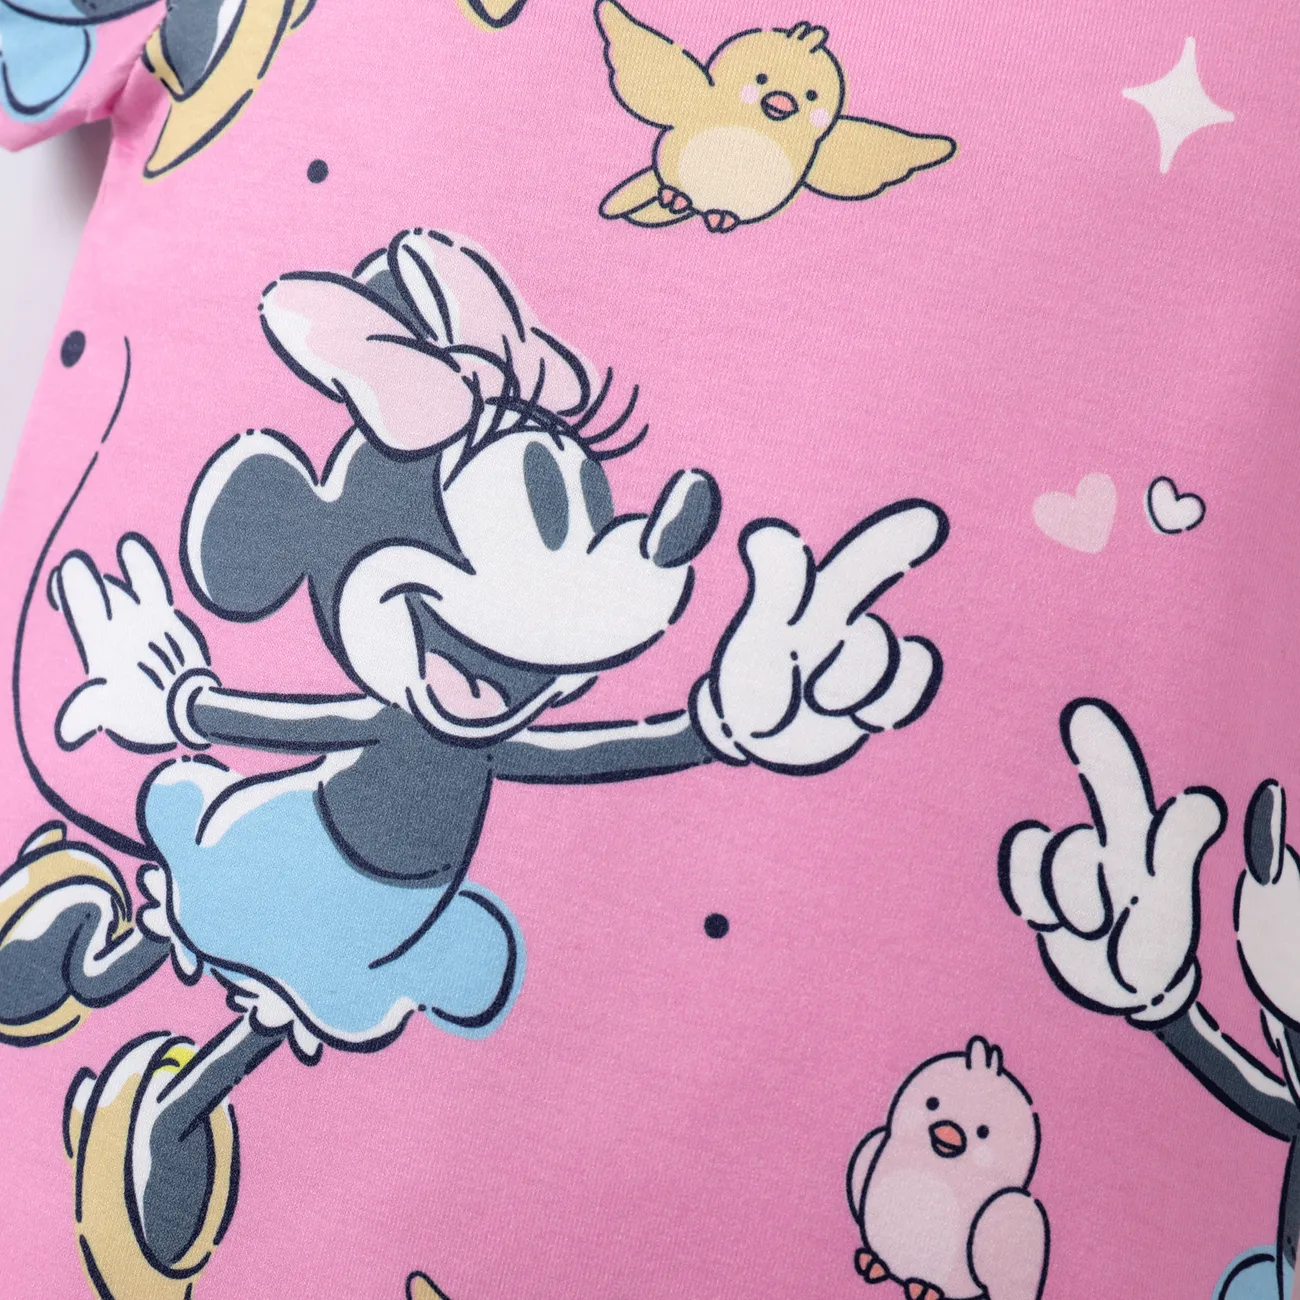 Disney Mickey and Friends 1pc Baby Girls/Boys Naia™ Character All-Over Print with Short Sleeve Jumpsuit Pink big image 1